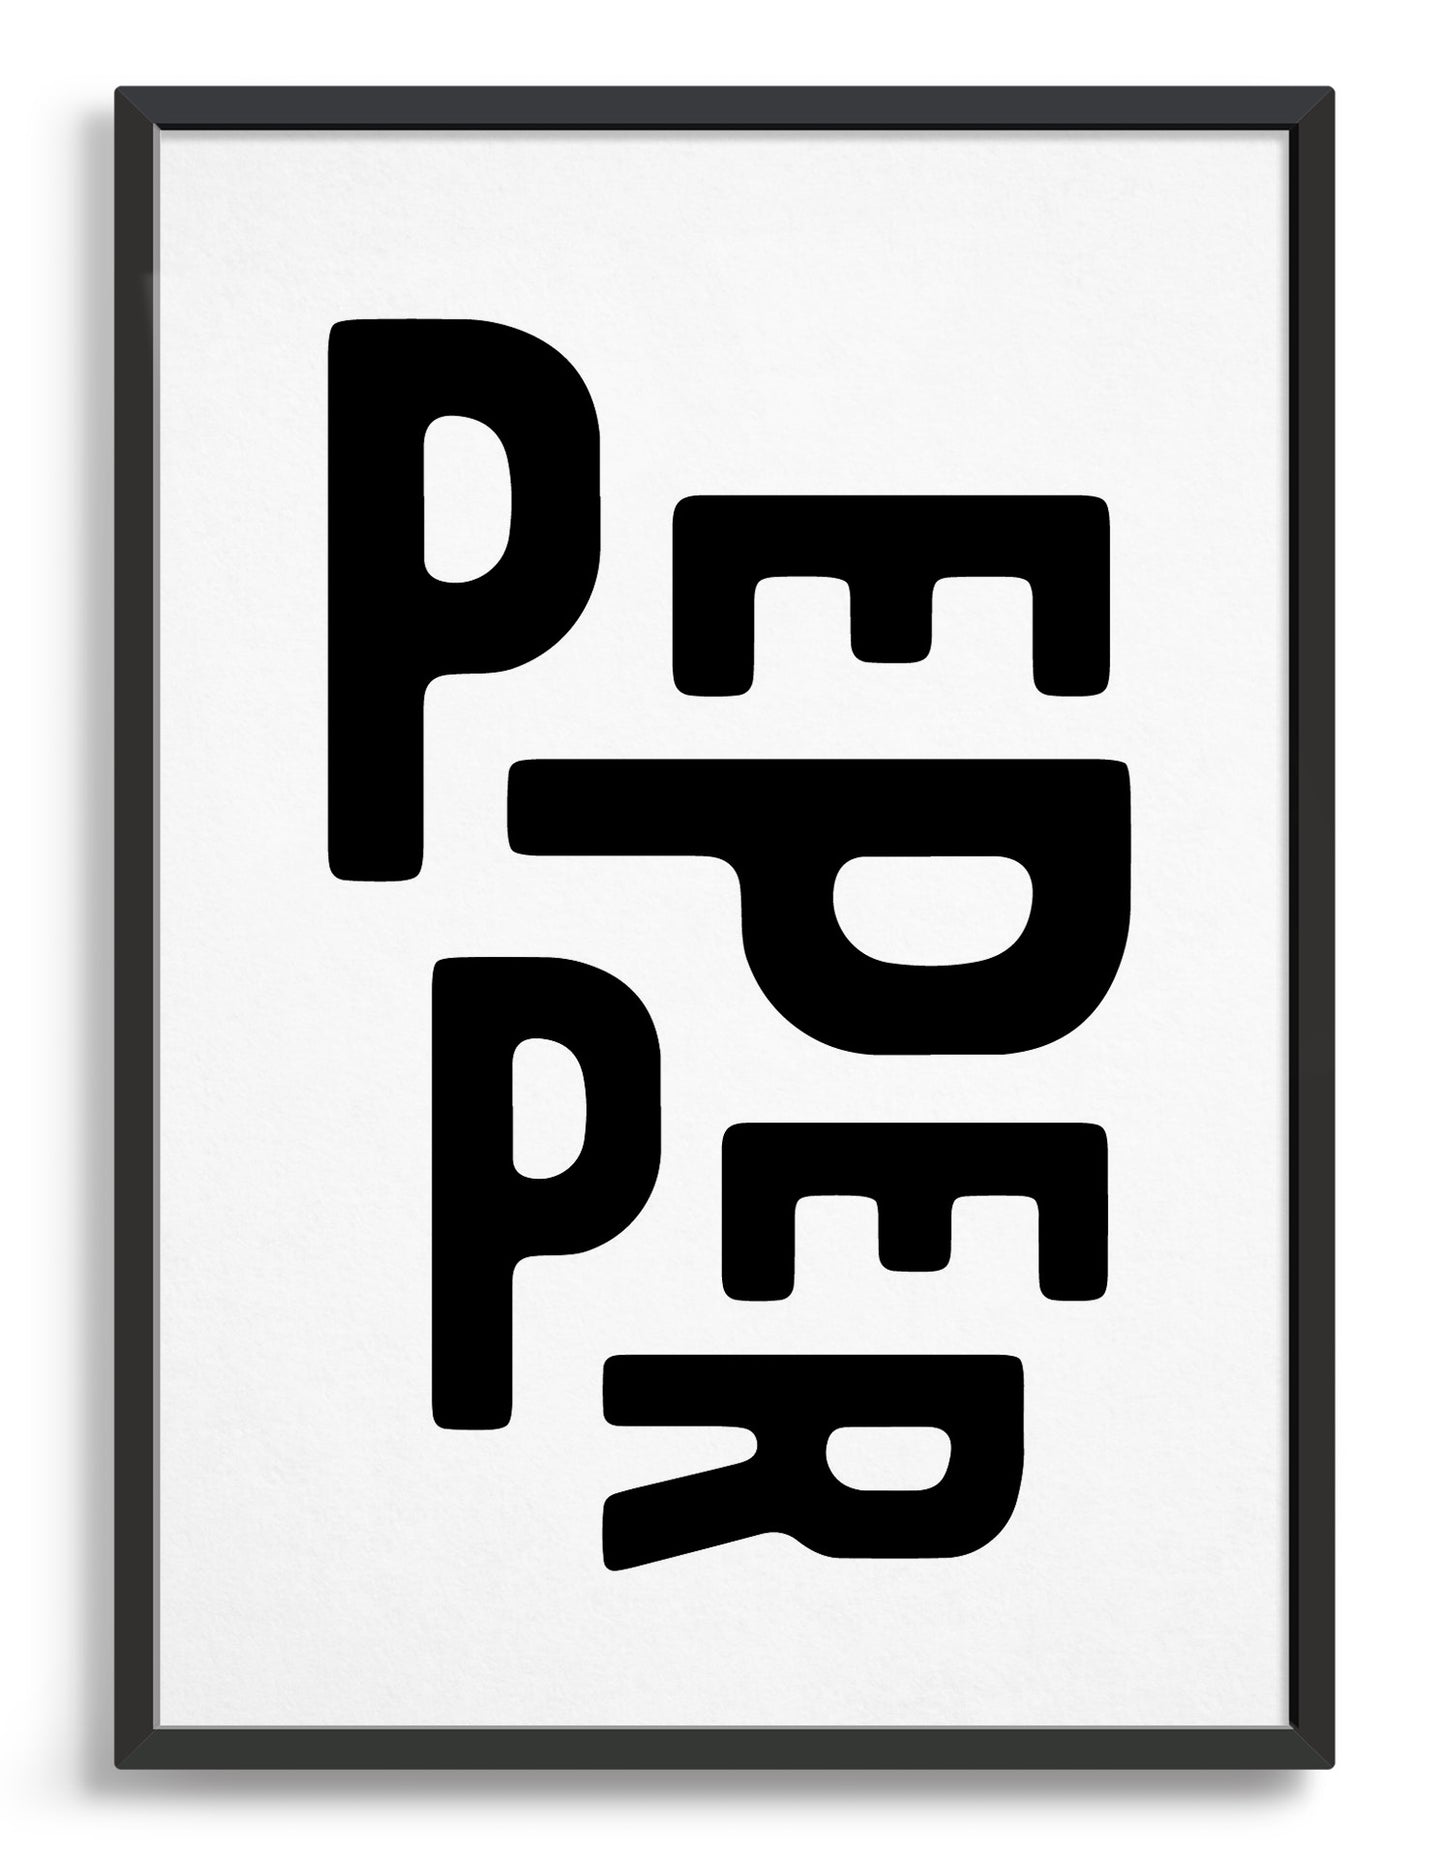 Framed typography art print of the word pepper in black text against a white background